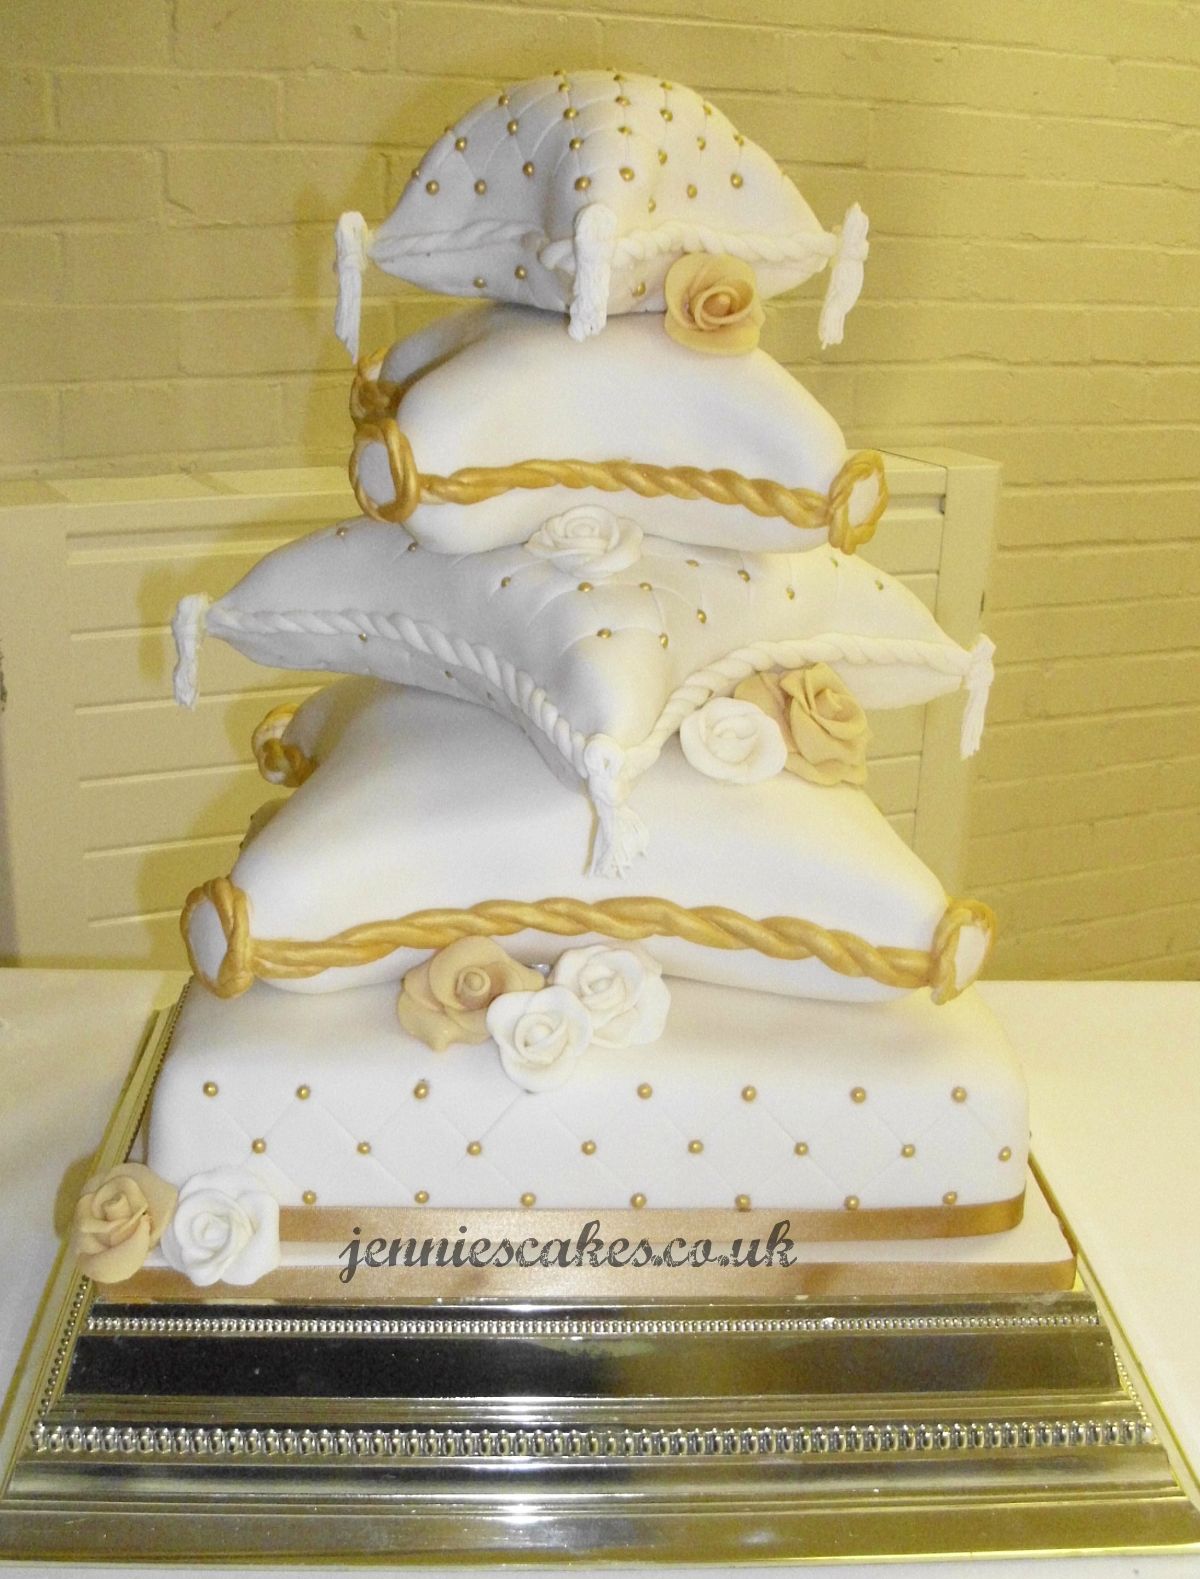 Jennie's cake's and catering-Image-61